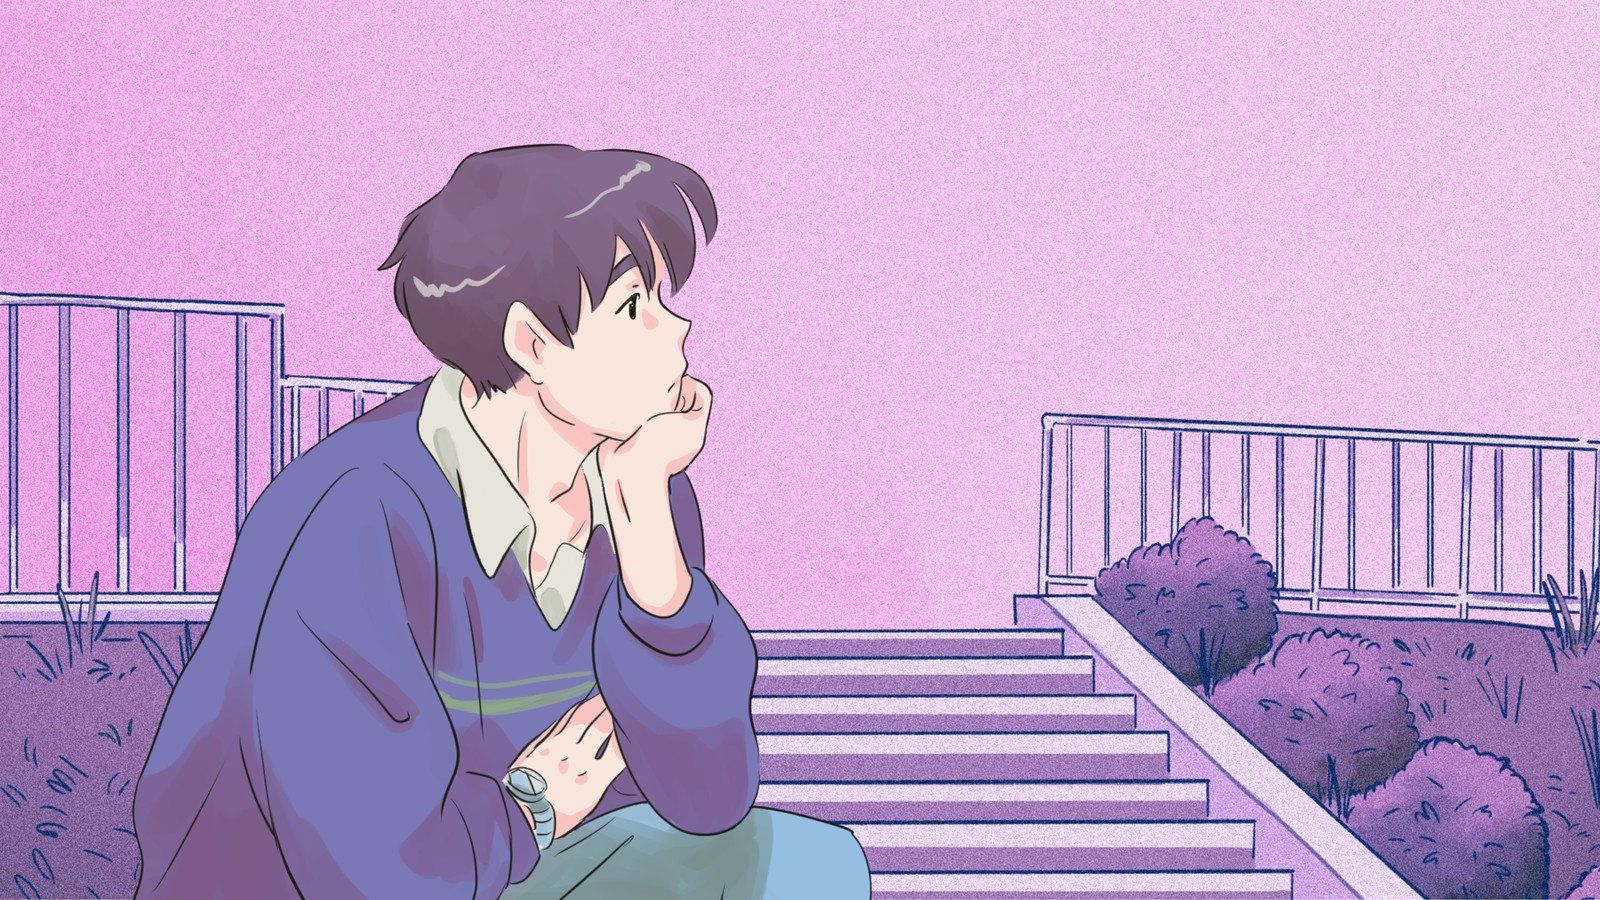 A man sitting on the steps of some stairs - Anime